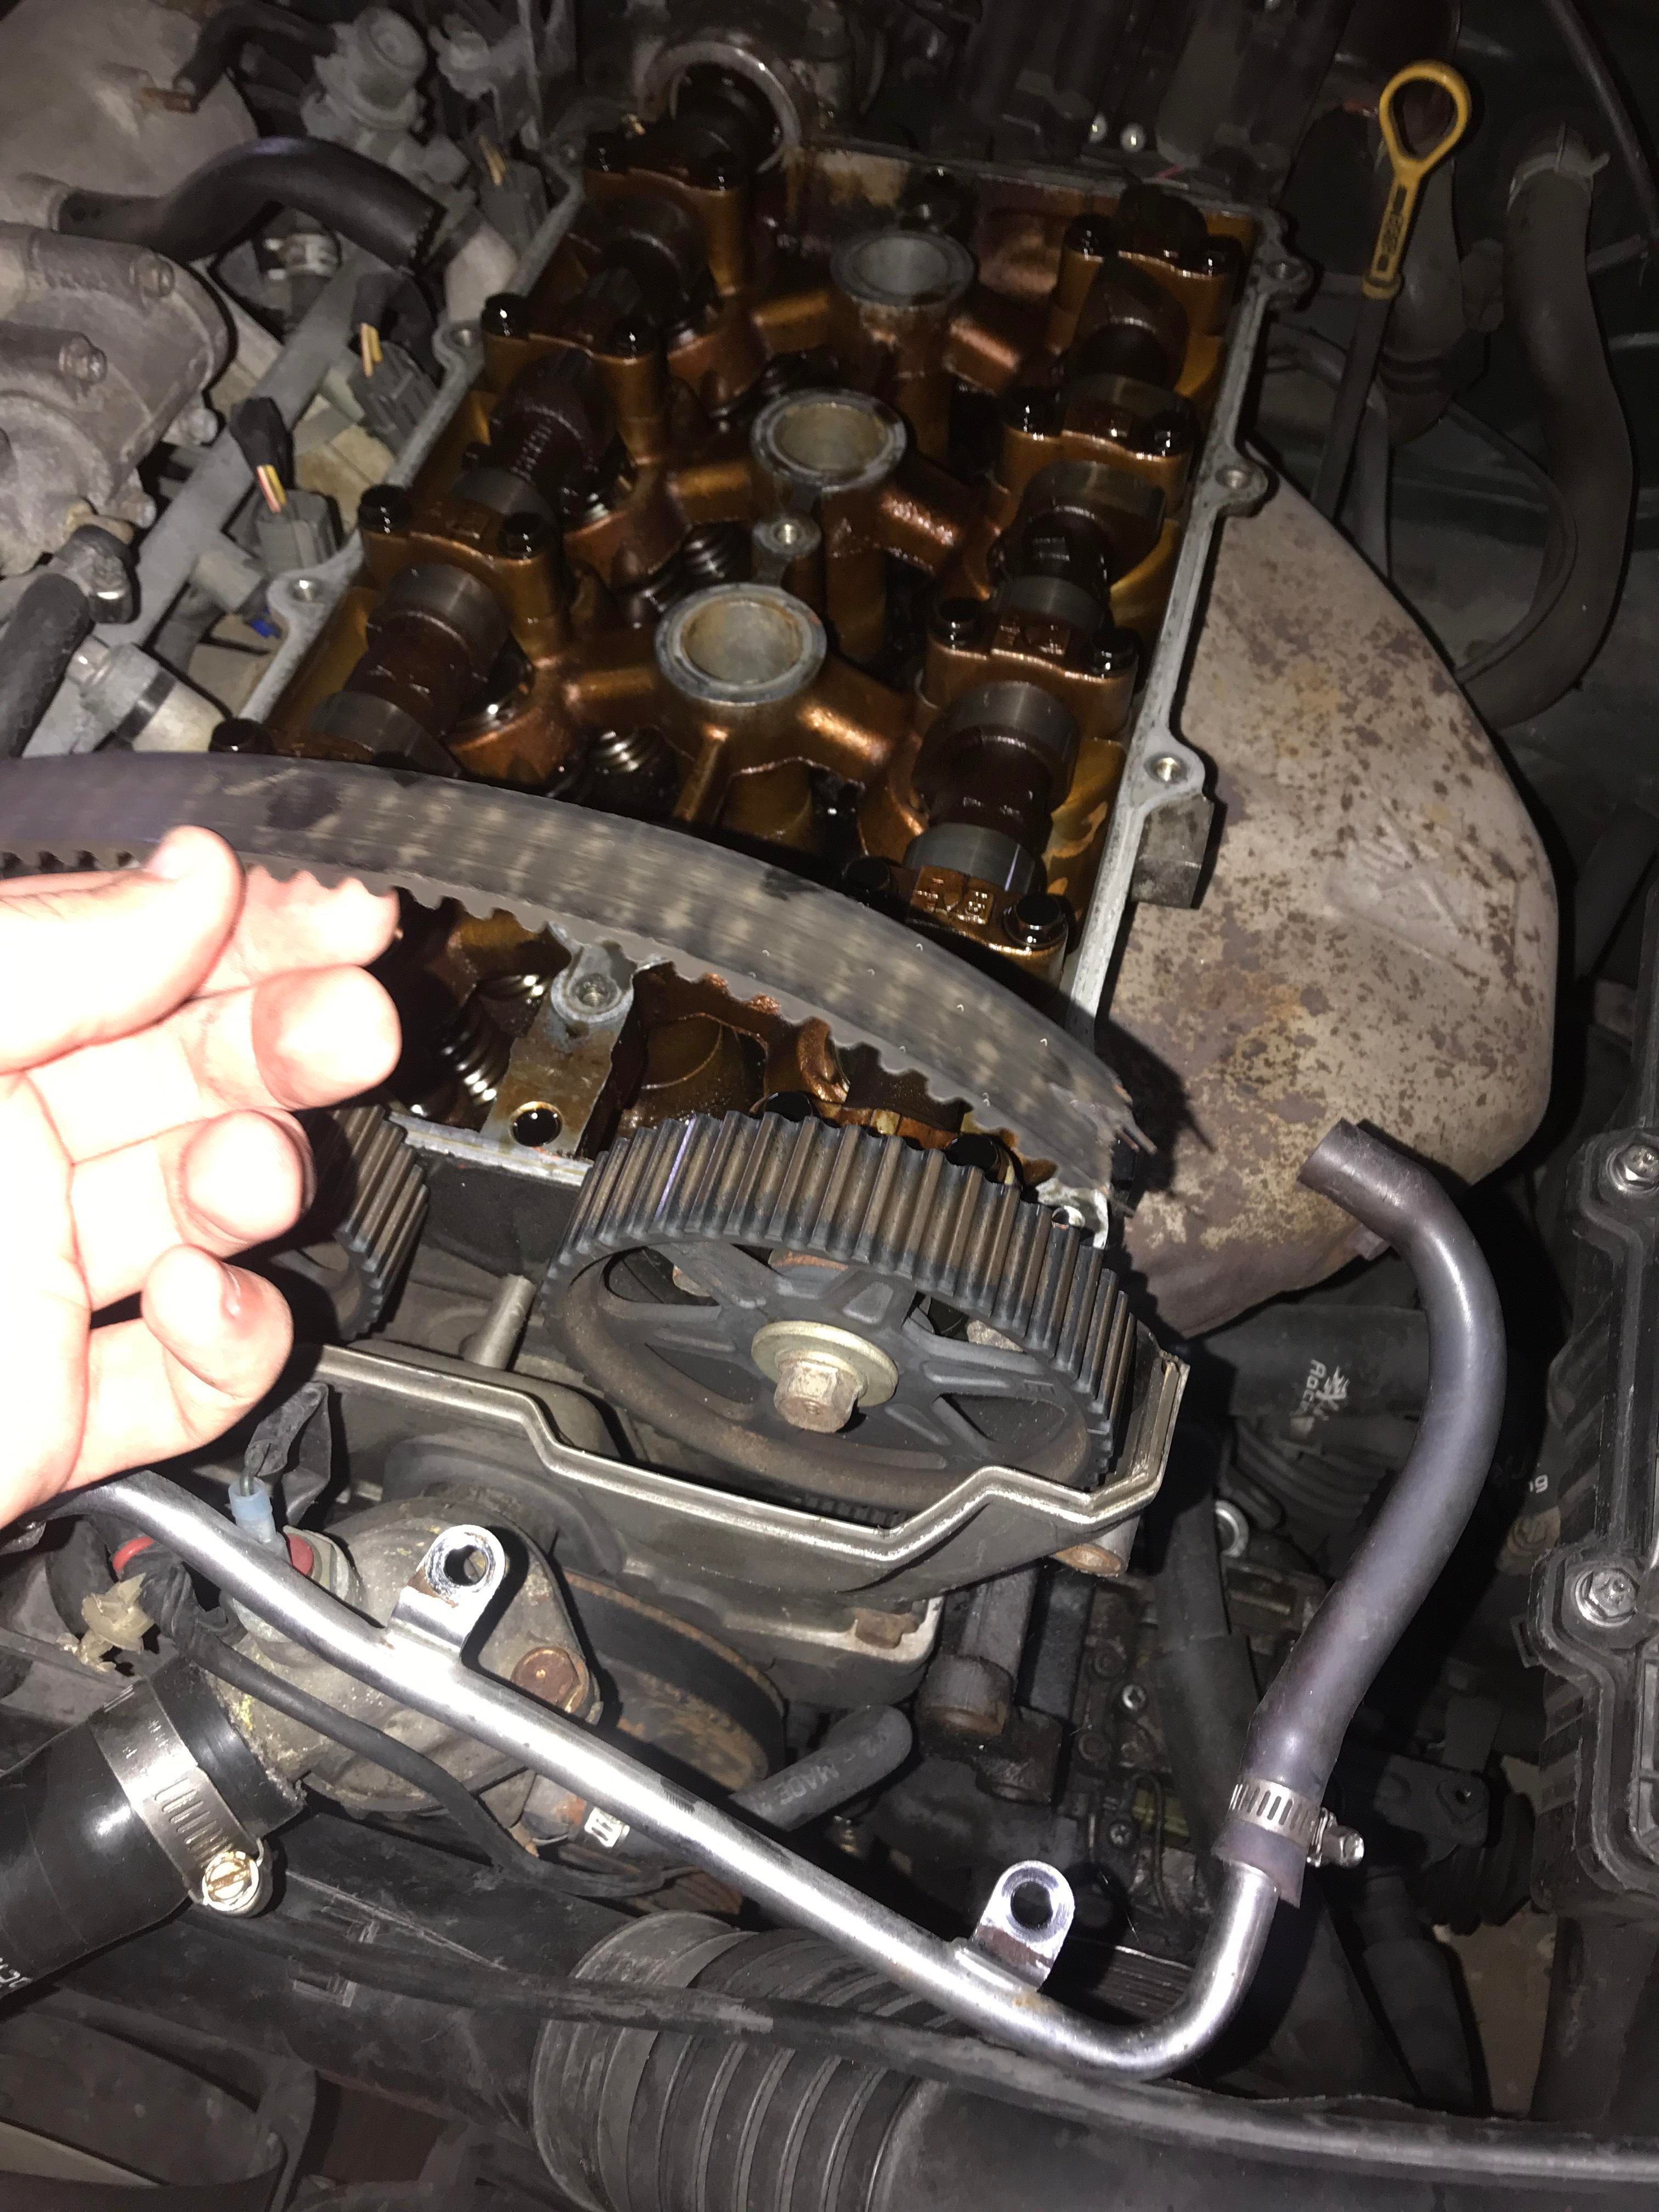 Timing belt on Interference Engine